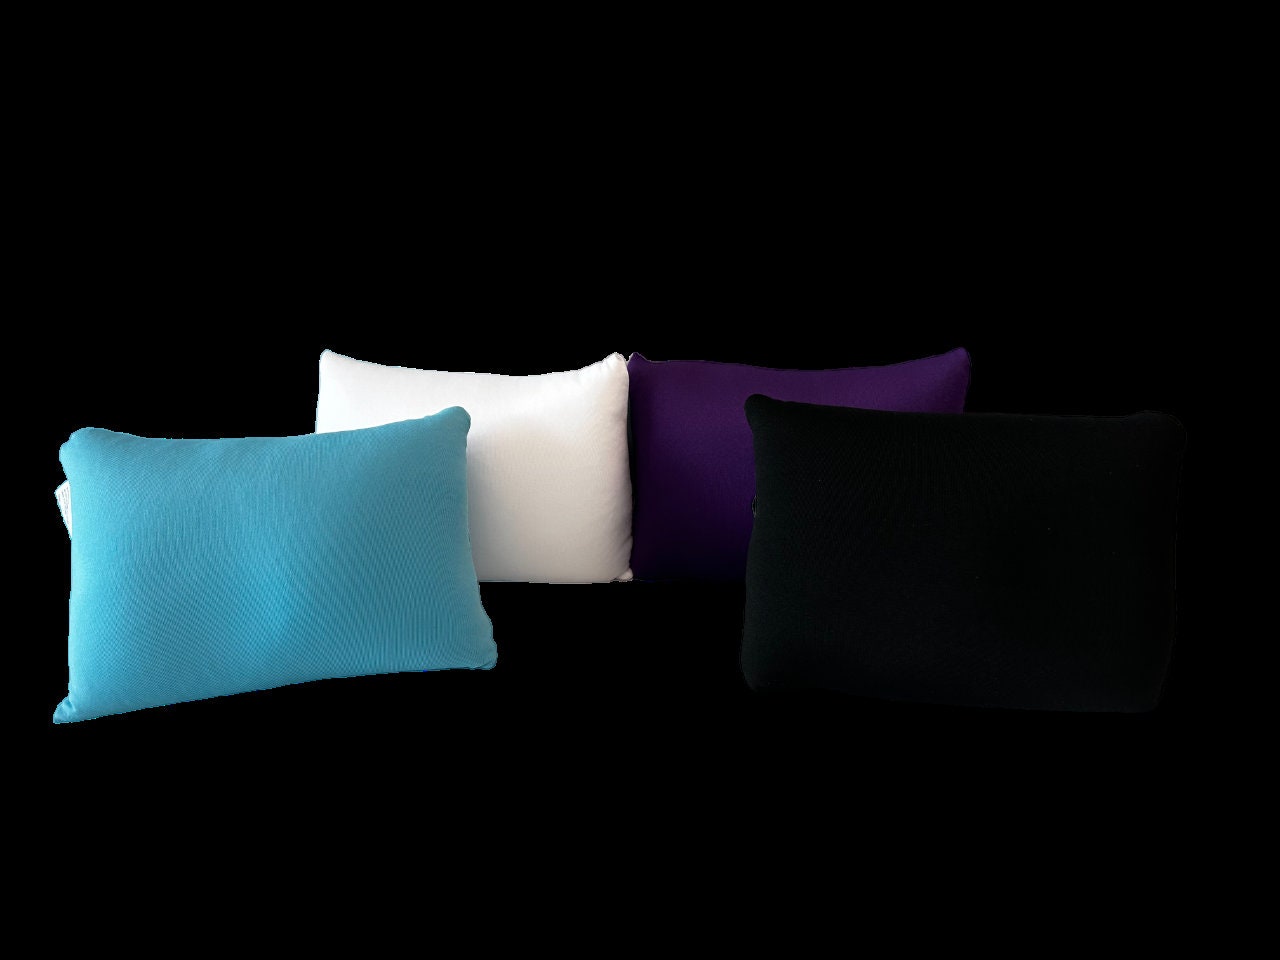 The Buttress Pillow: Rest your top on a bottom!